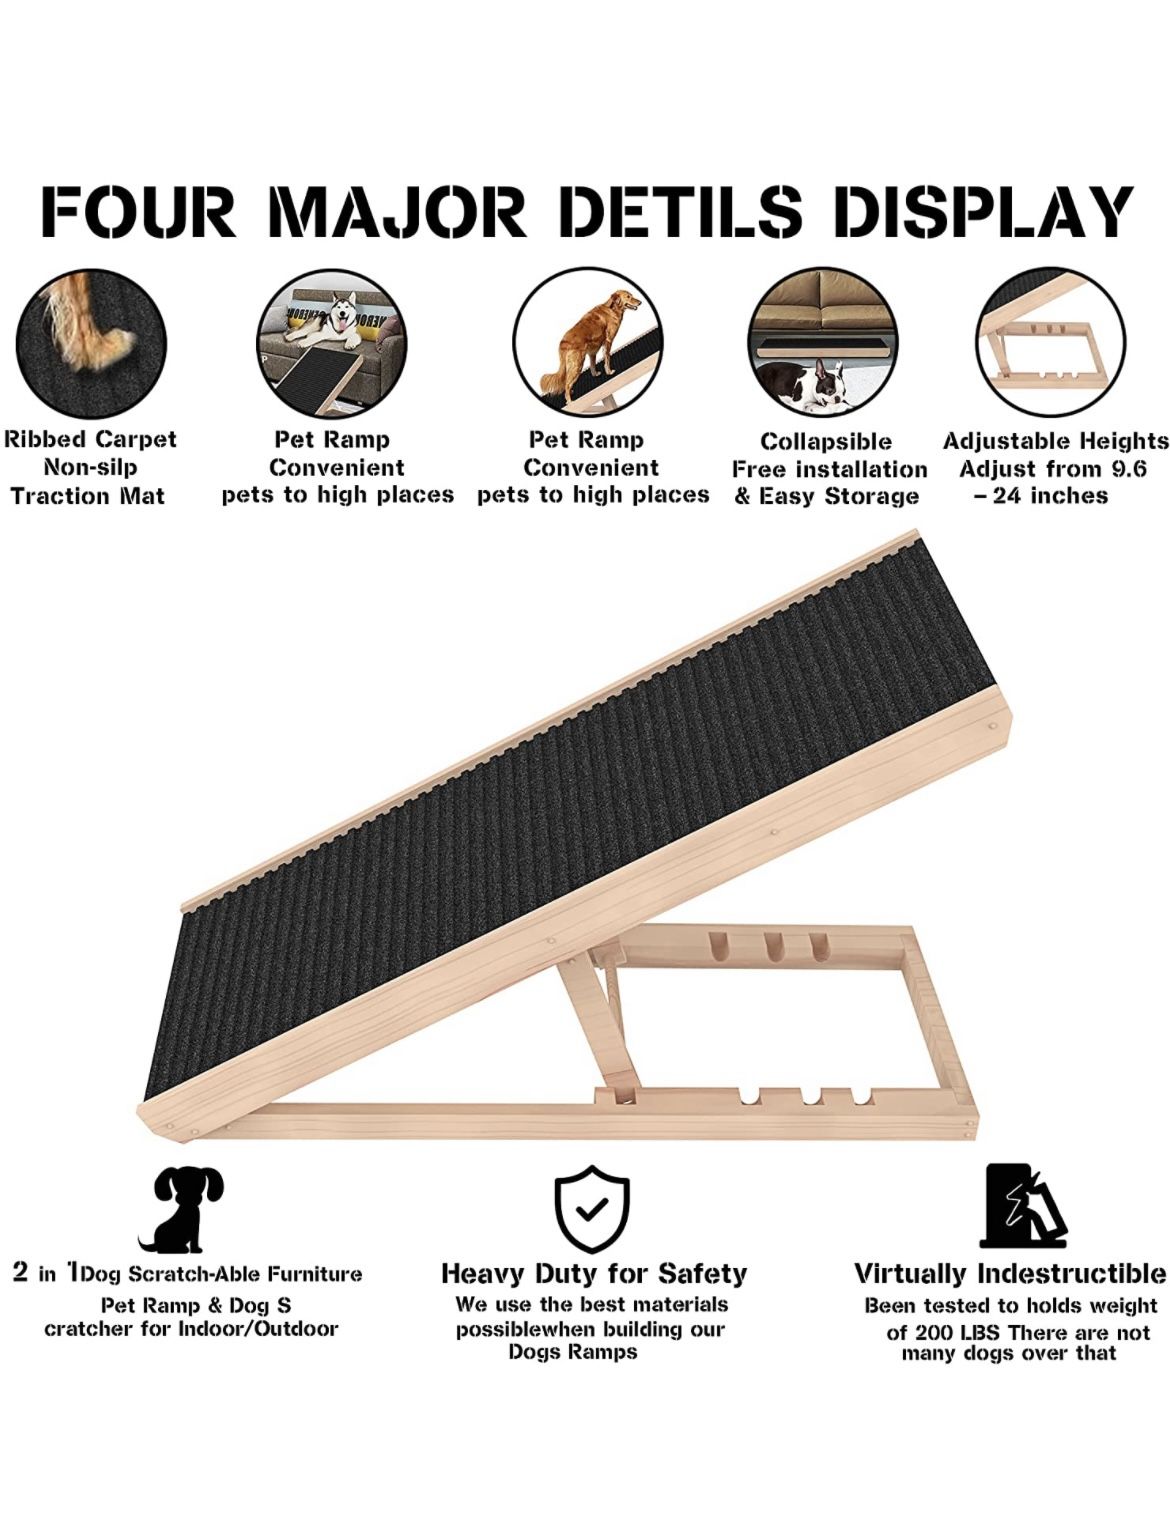 Adjustable Pet Ramp for All Dogs and Cats - Folding Portable Dog Ramp for Couch or Bed with Non Slip Carpet Surface, 40”Long and Height Adjustable 